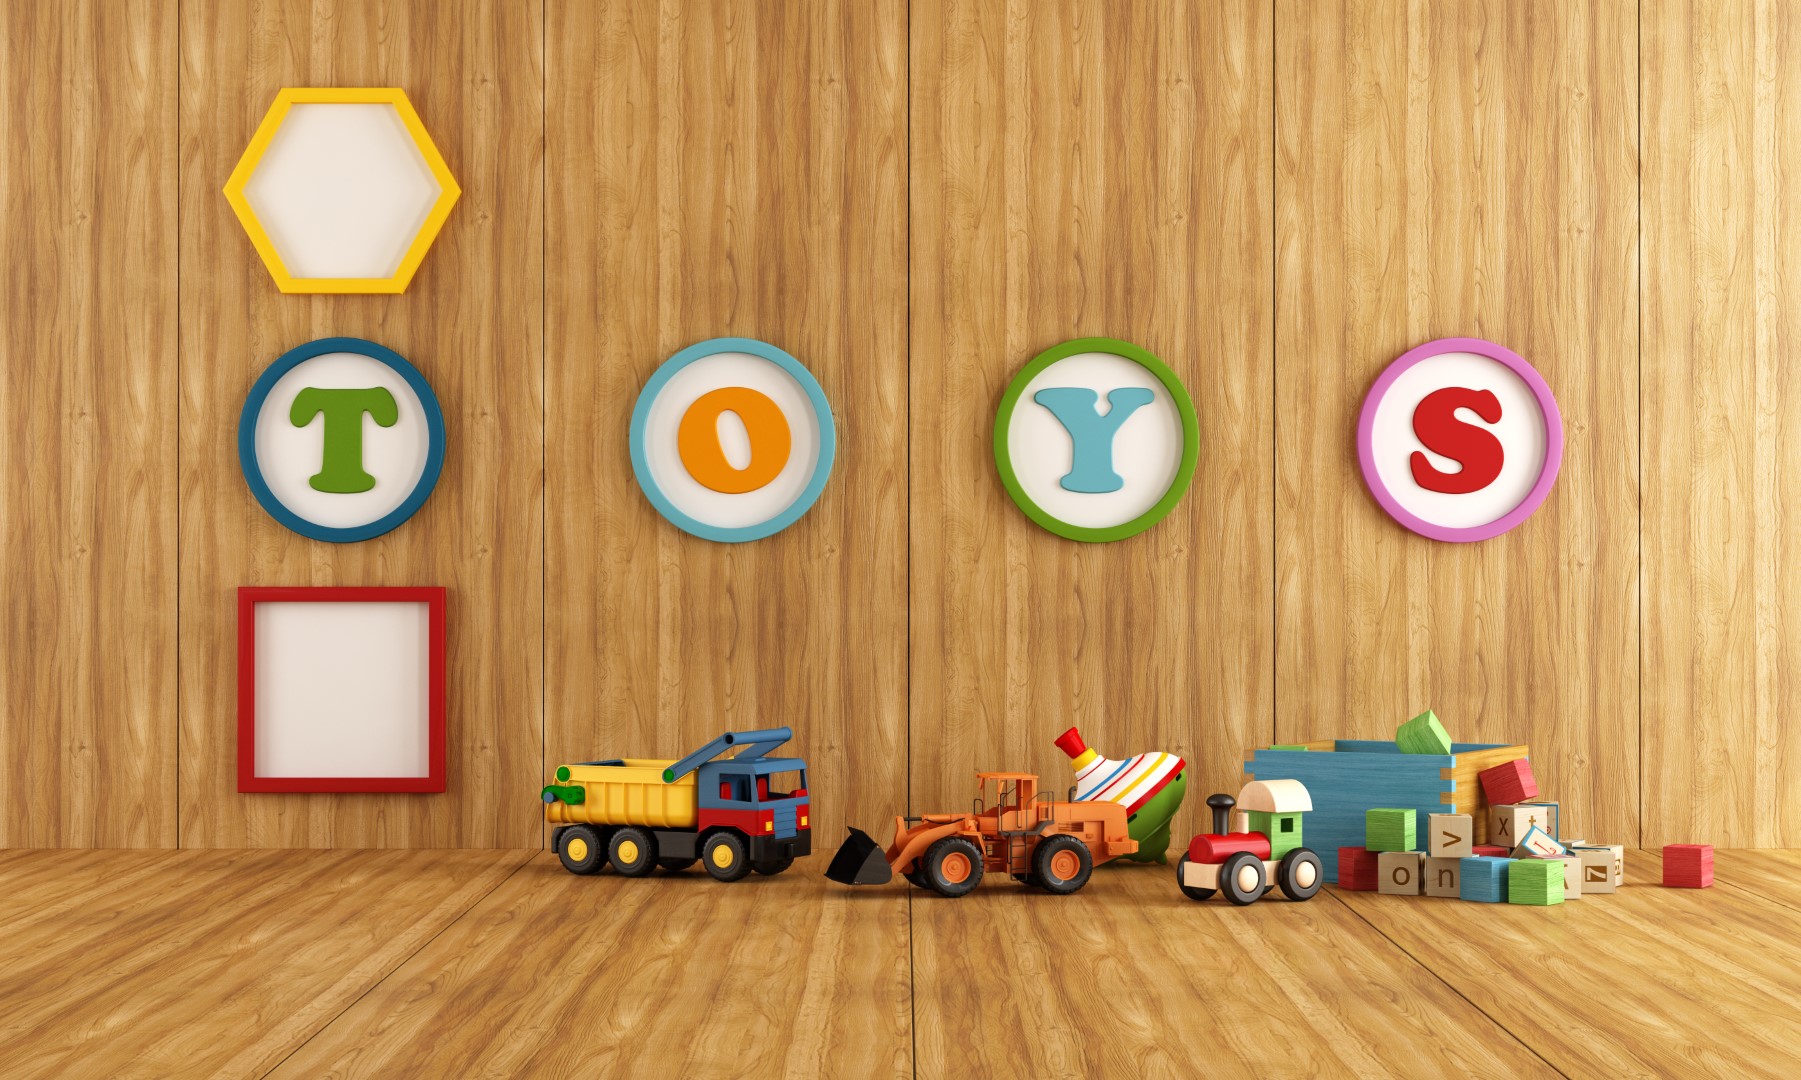 Wooden Playroom With Toys 2021 08 26 15 32 54 Utc